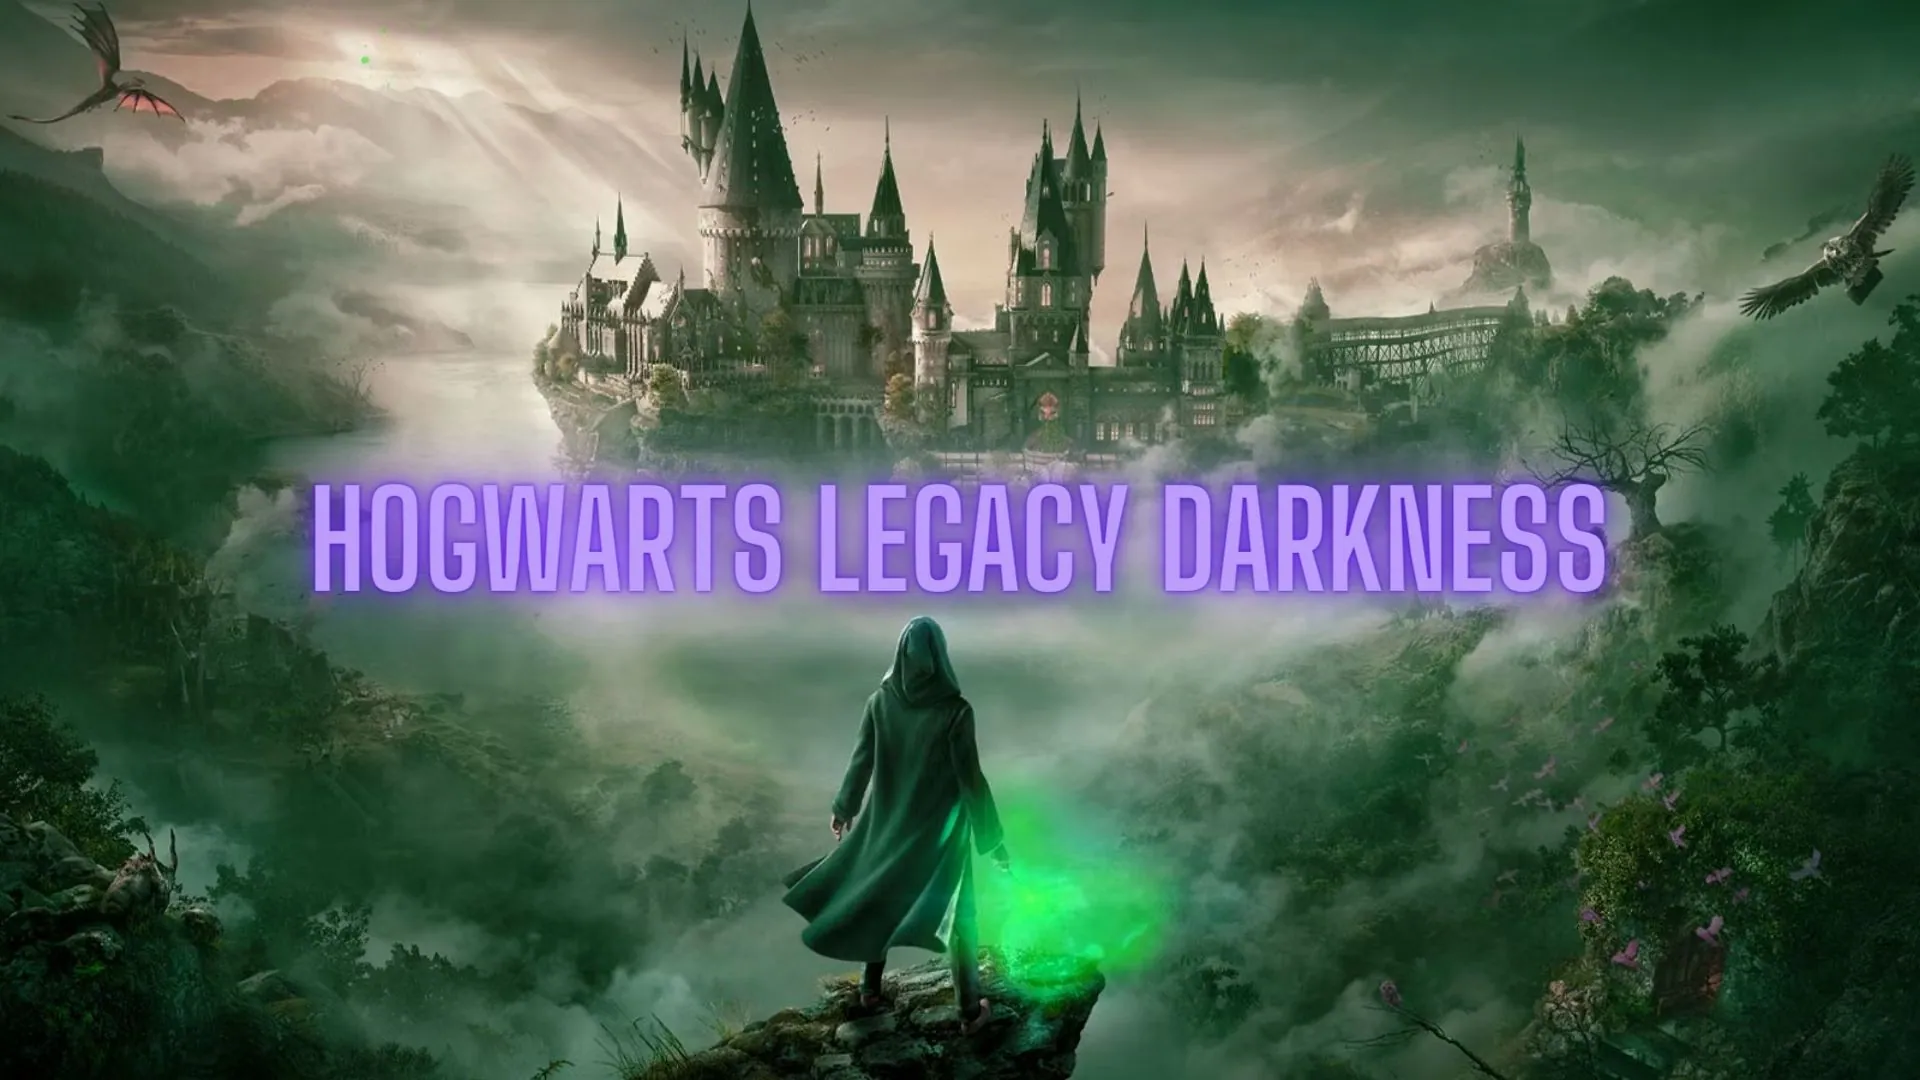 Hogwarts Legacy Darkness Parents Guide | Age Rating (2023)